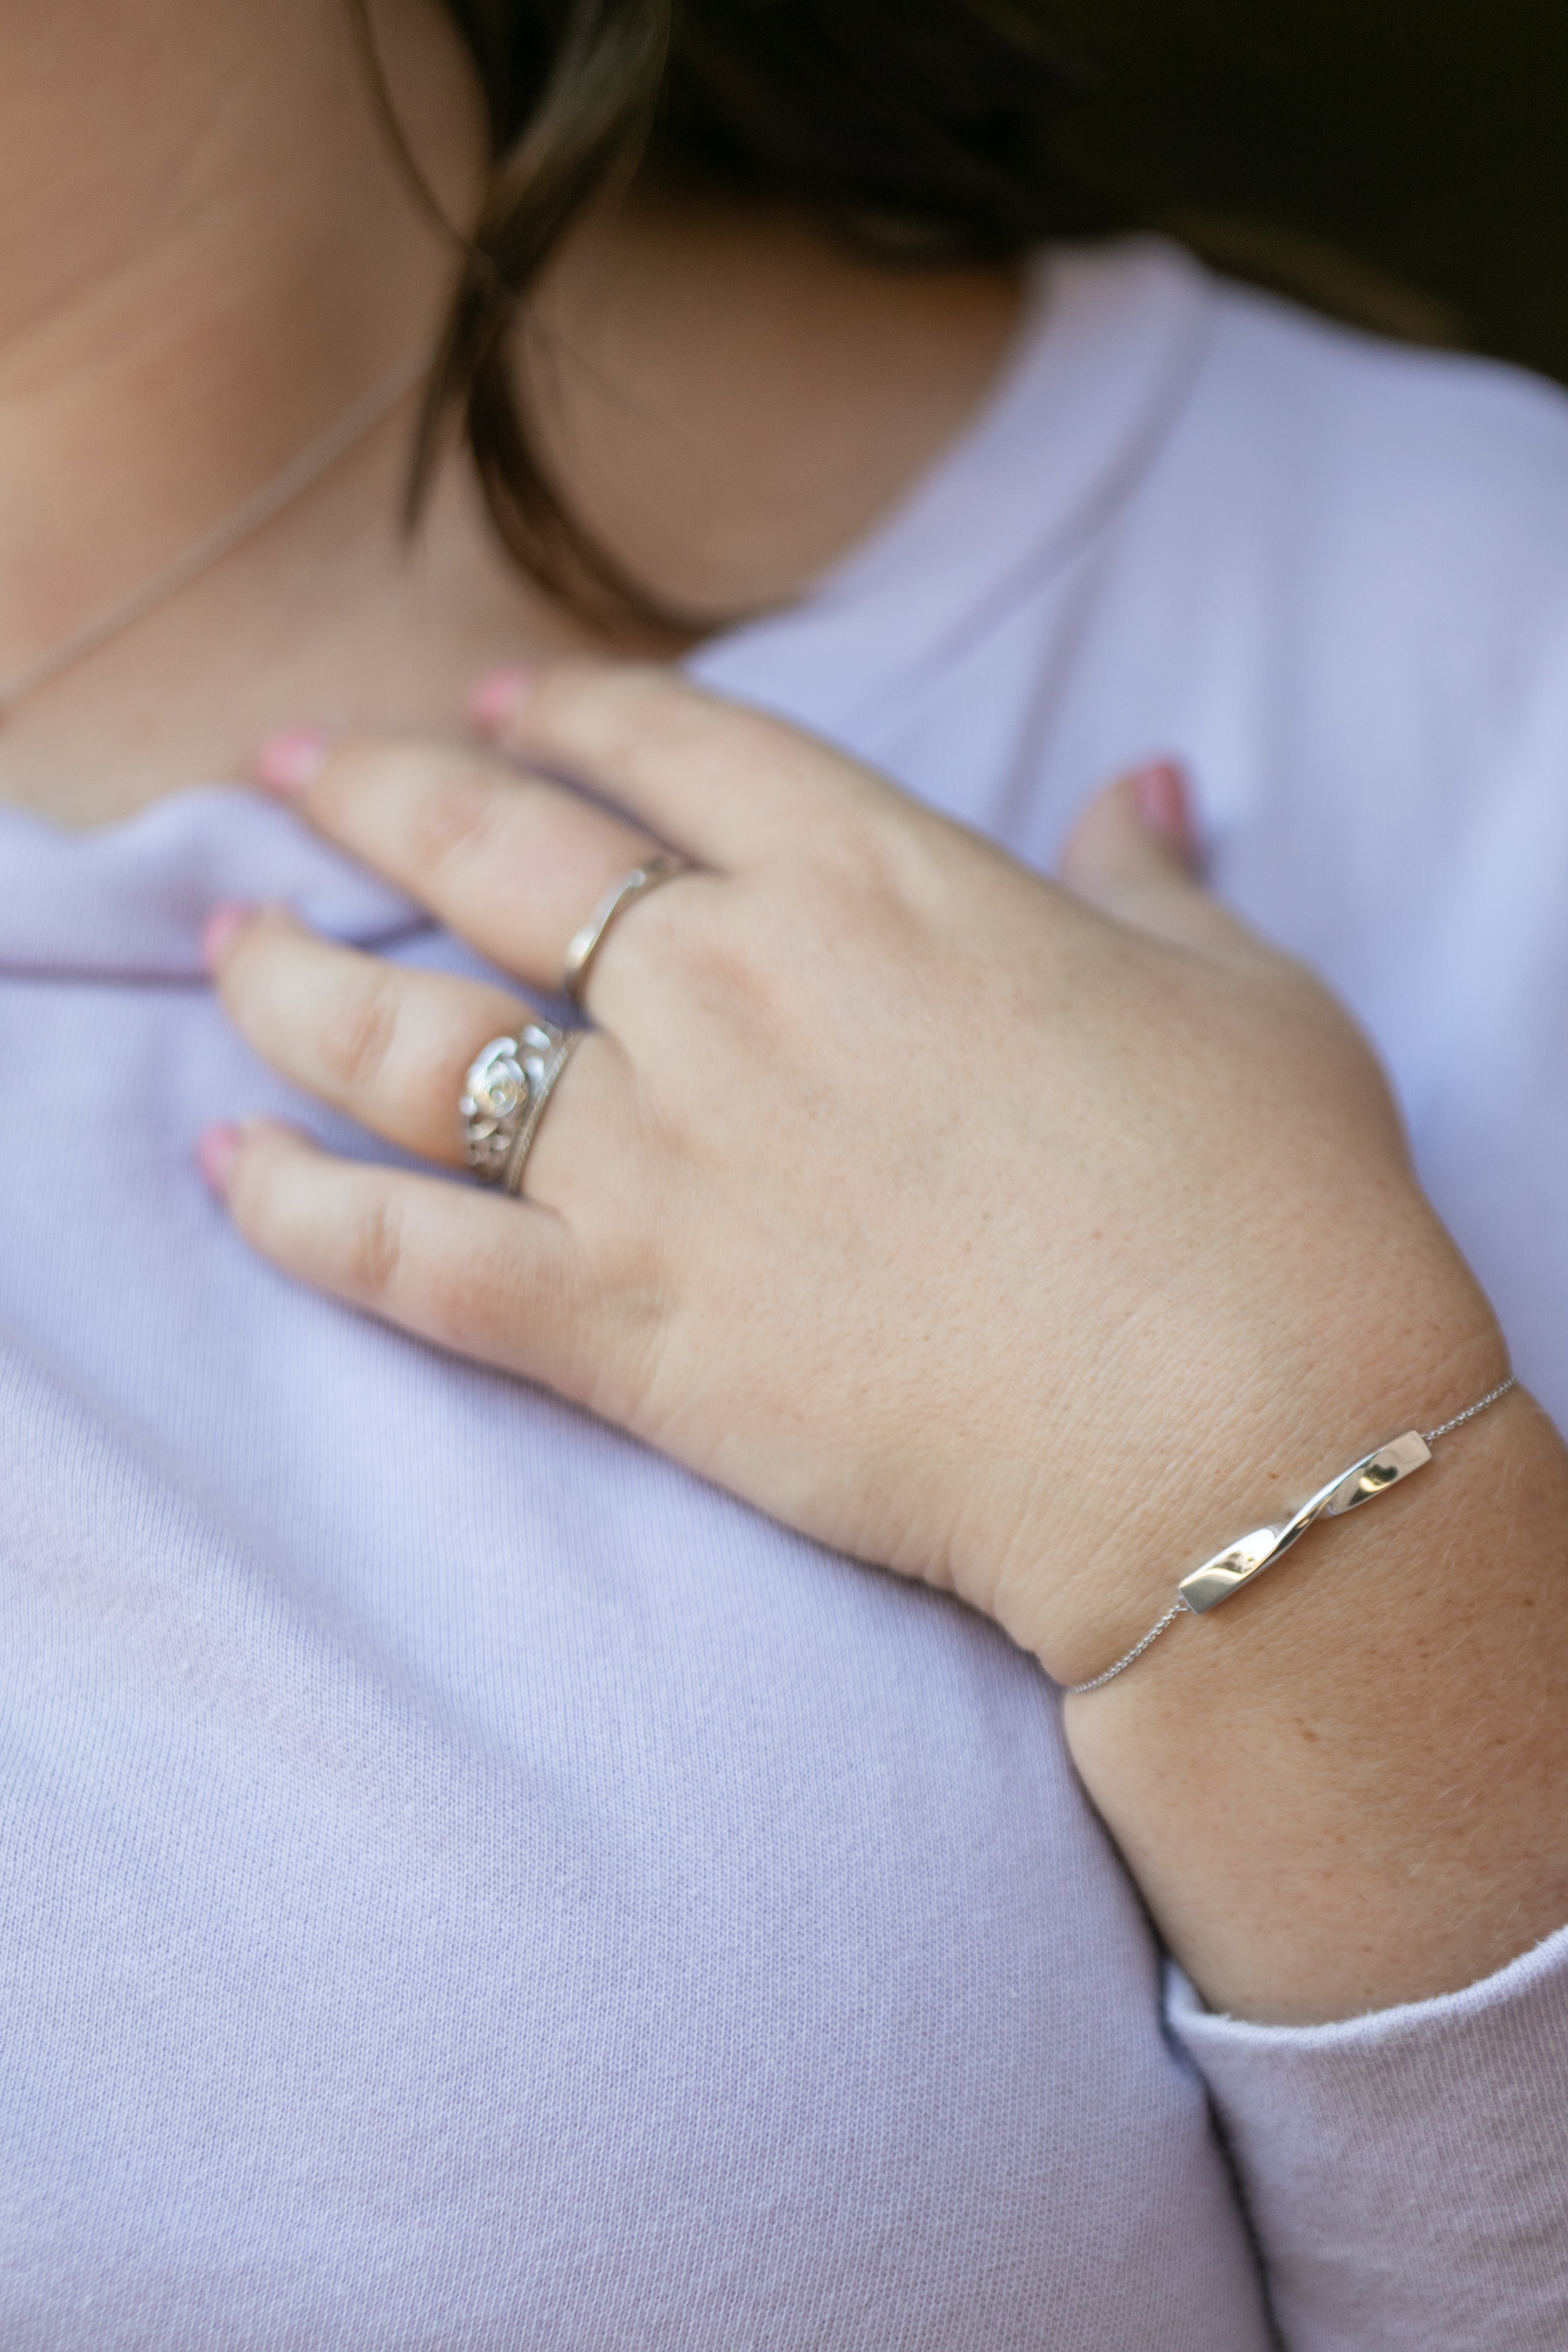 a detailed image of a plus size woman's hand and wrist wearing a twist bracelet in silver and a twist ring in silver. She also wears a lilac colored sweatshirt.